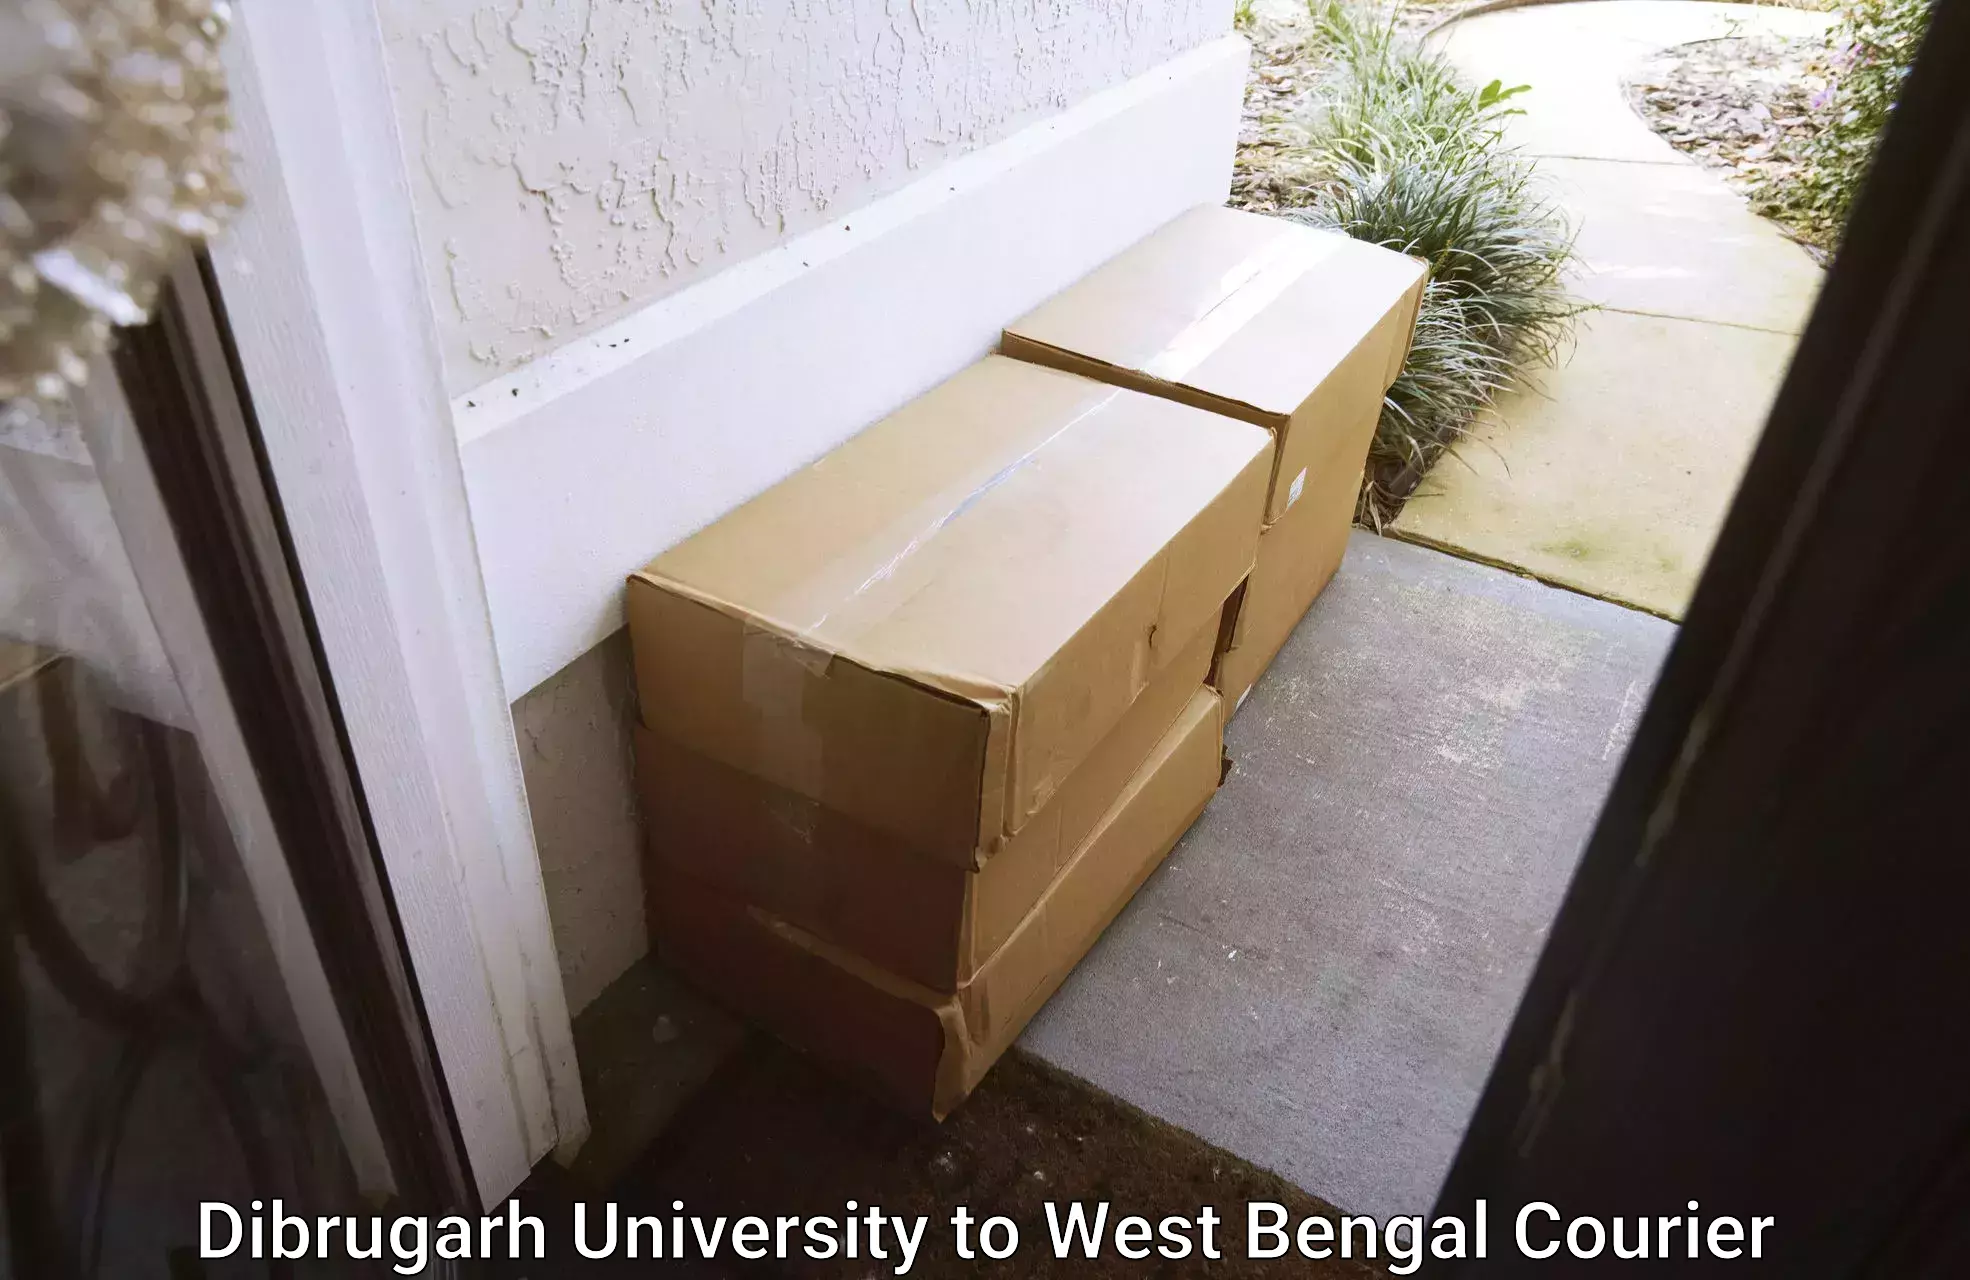 State-of-the-art courier technology Dibrugarh University to Bhadreswar